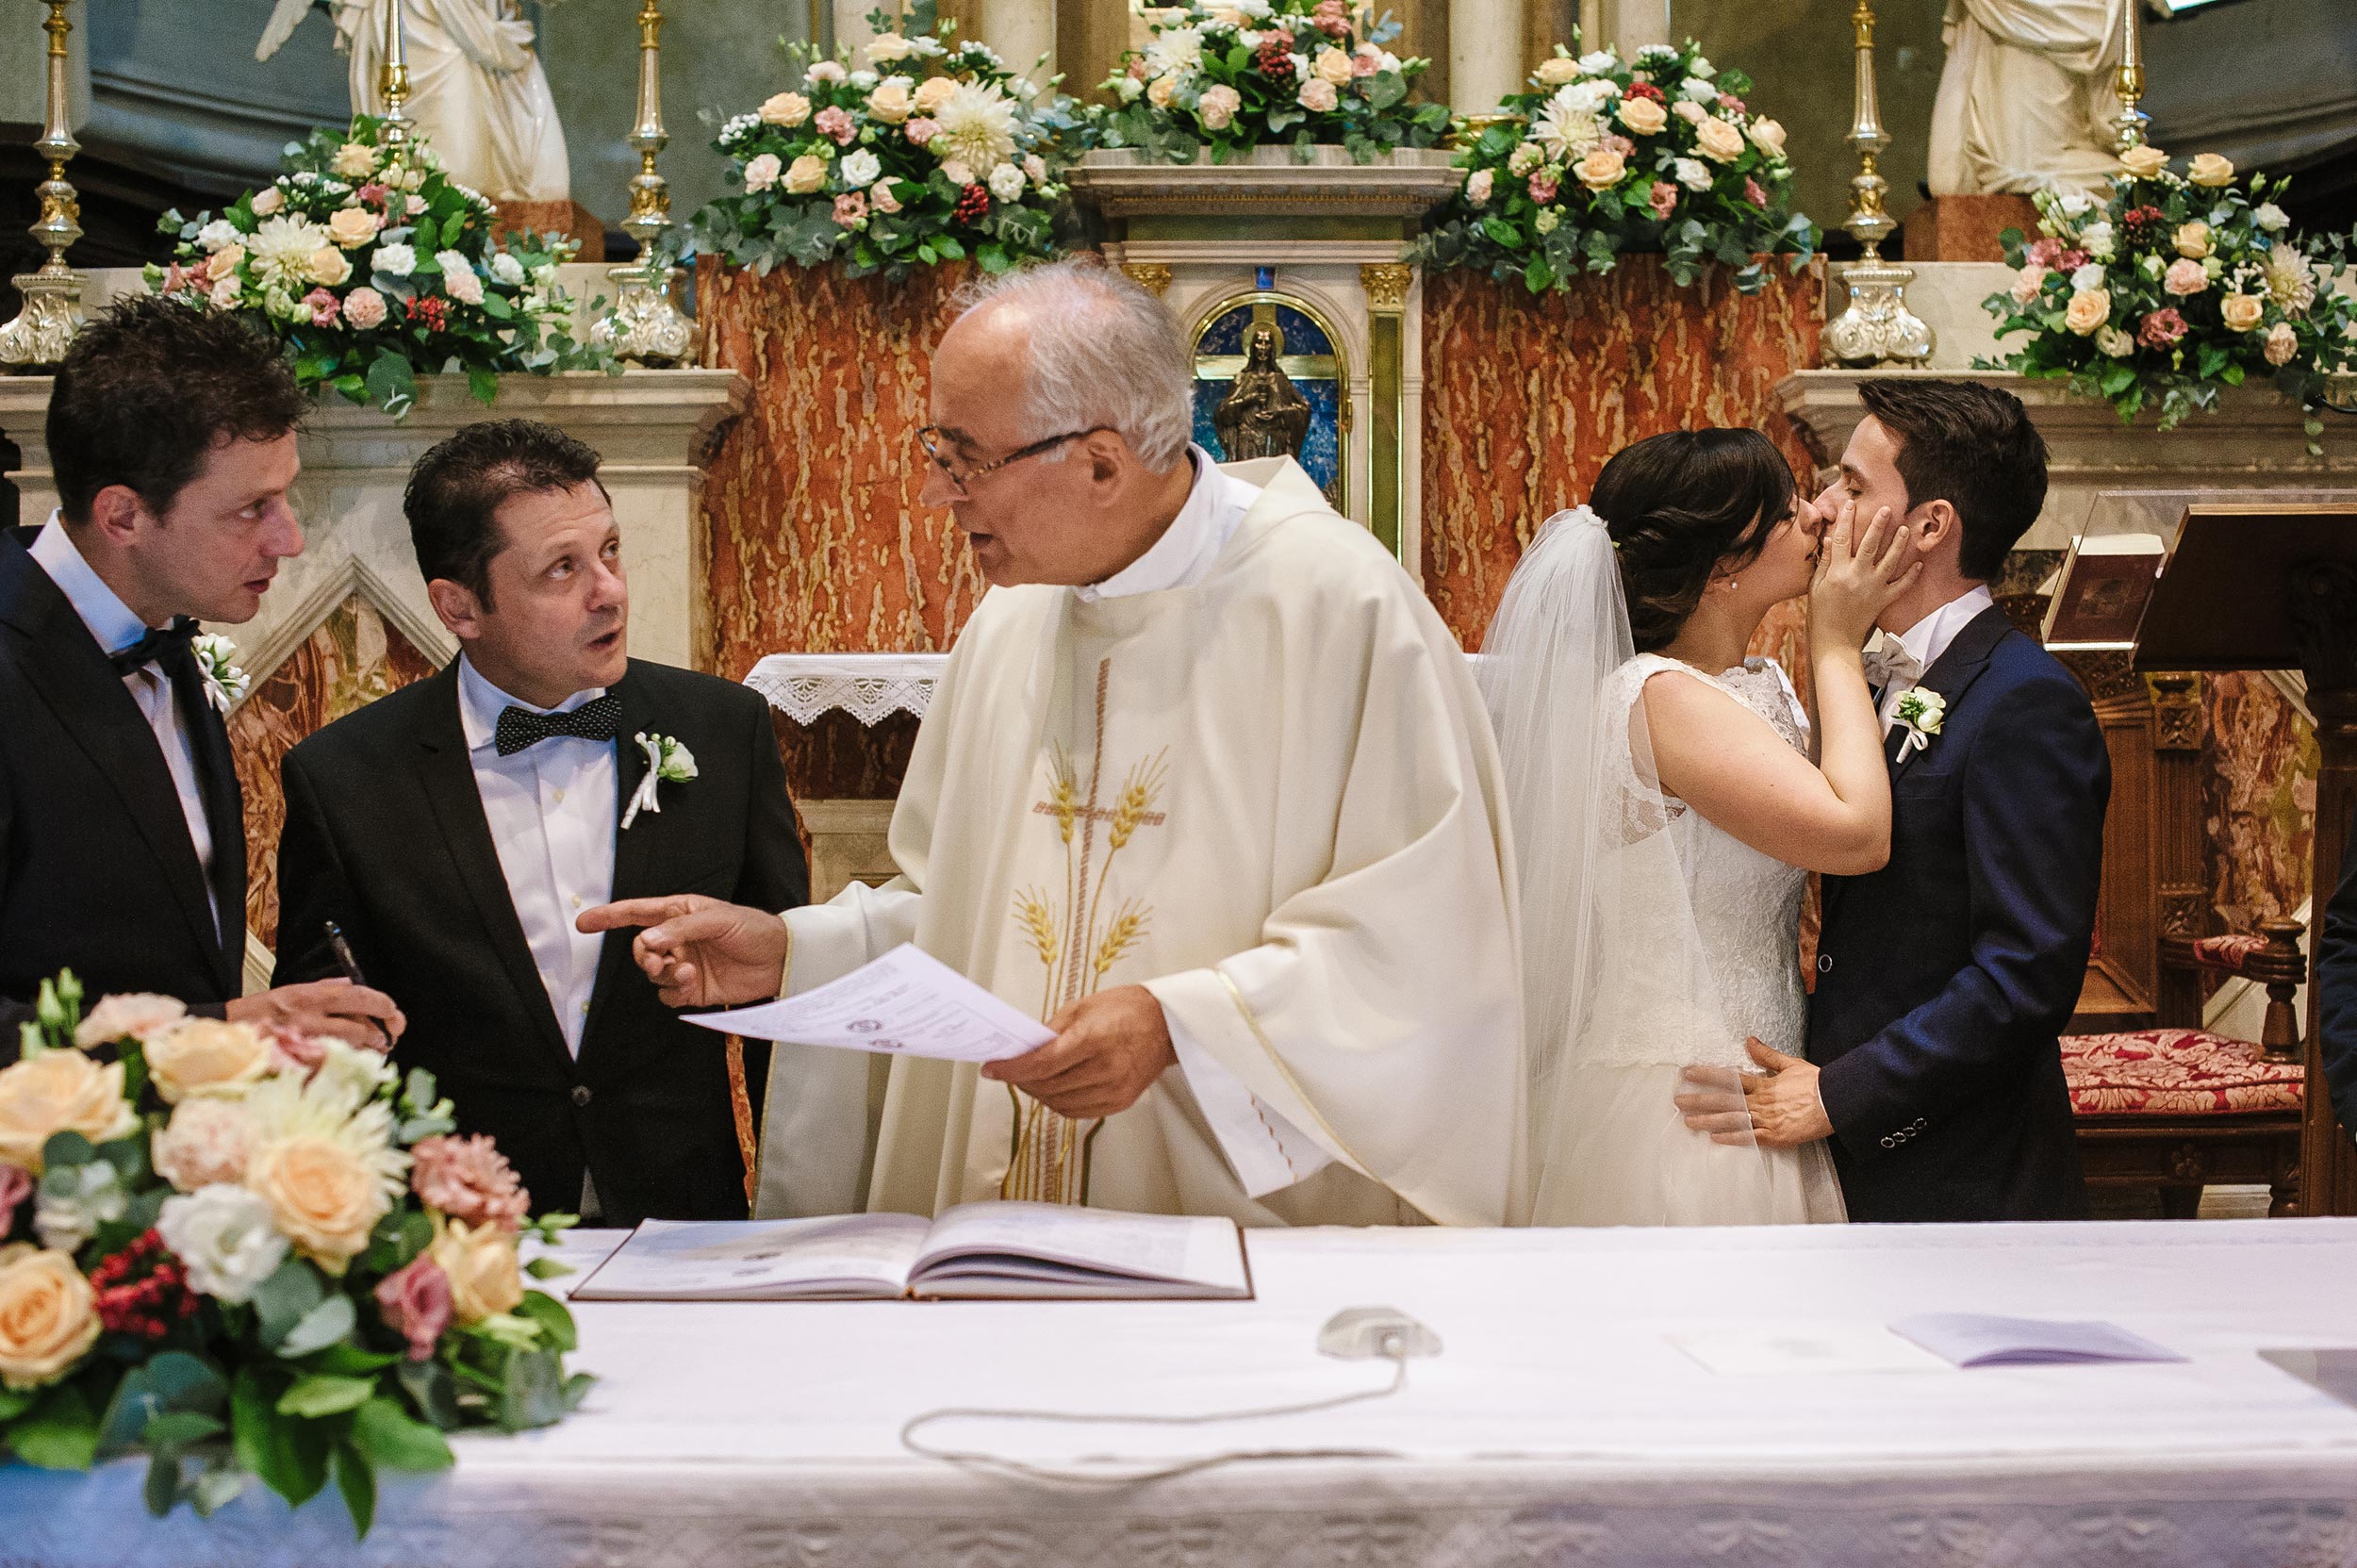 the-bride-kisses-the-groom-in-church-while-witnesses-wait-to-sign.jpg